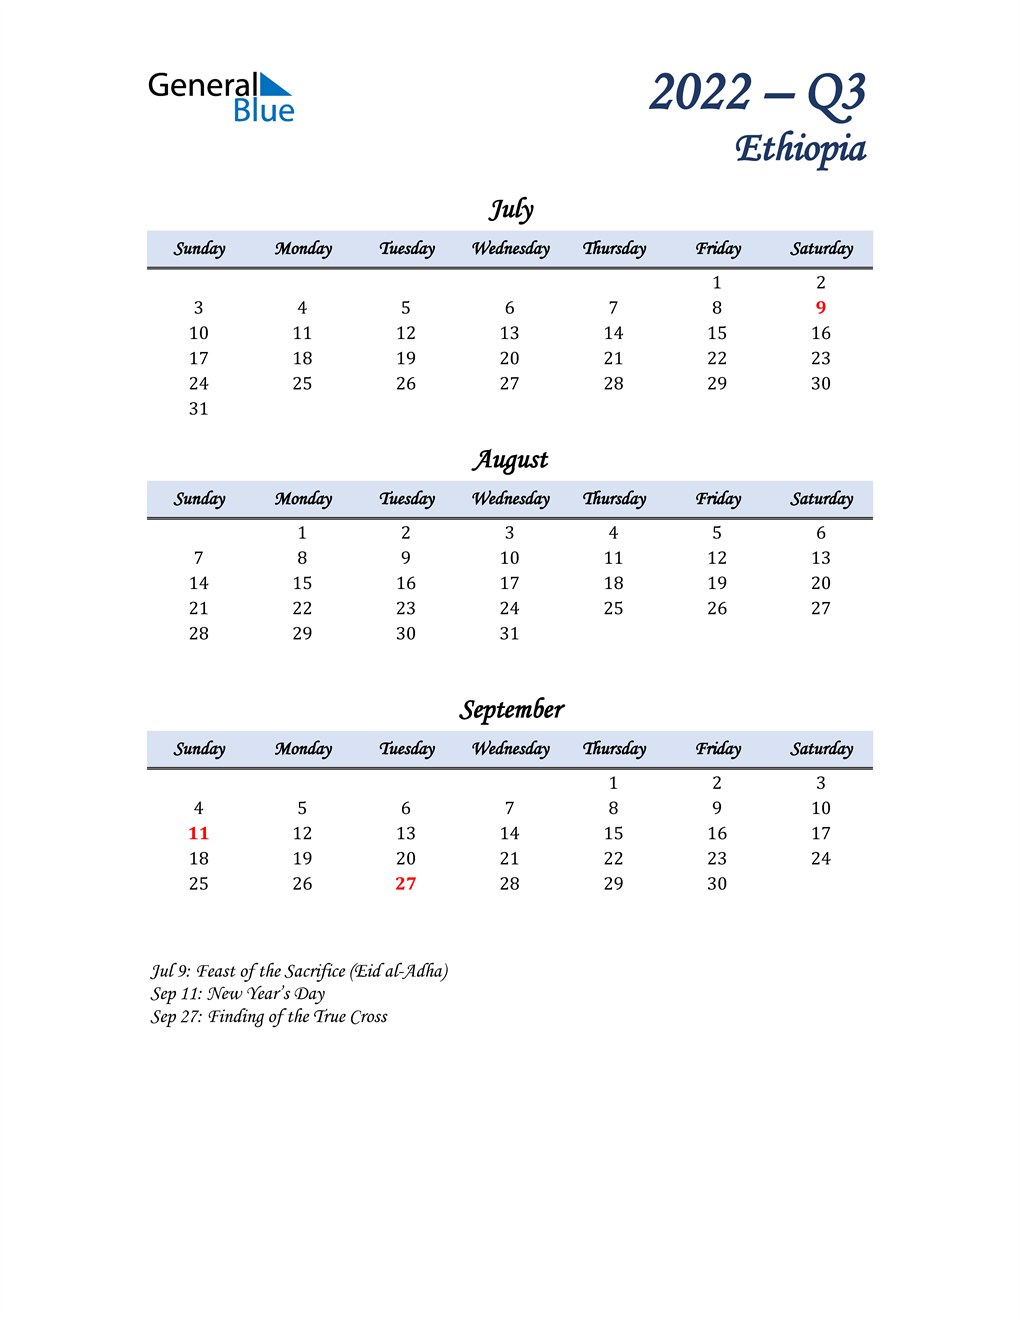  July, August, and September Calendar for Ethiopia